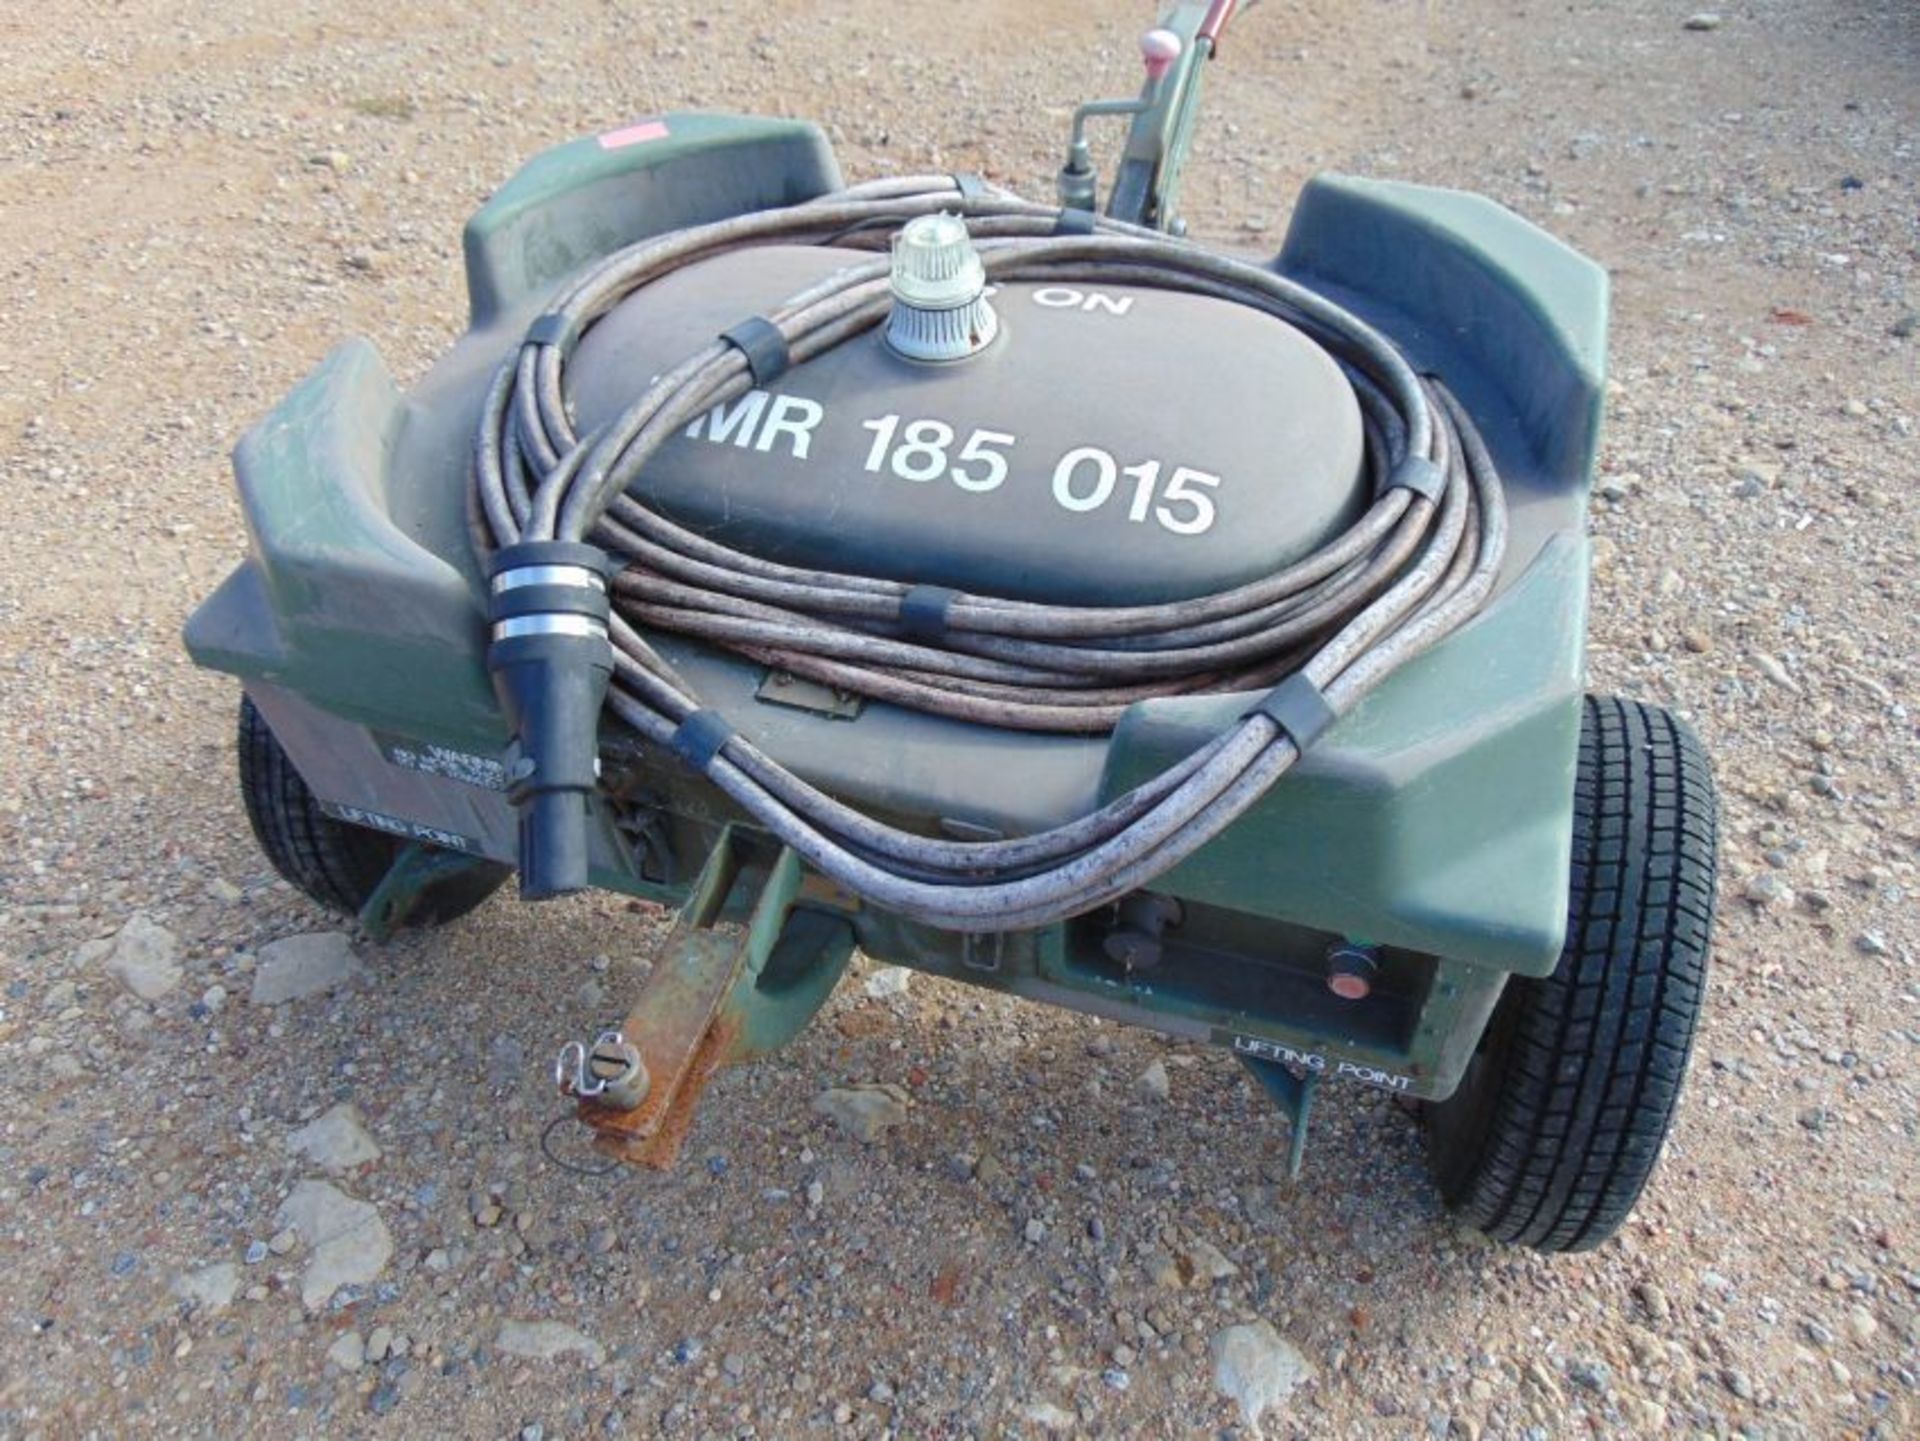 Aircraft Battery Electrical Starter Trolley c/w Batteries and Cables, From RAF - Image 4 of 7